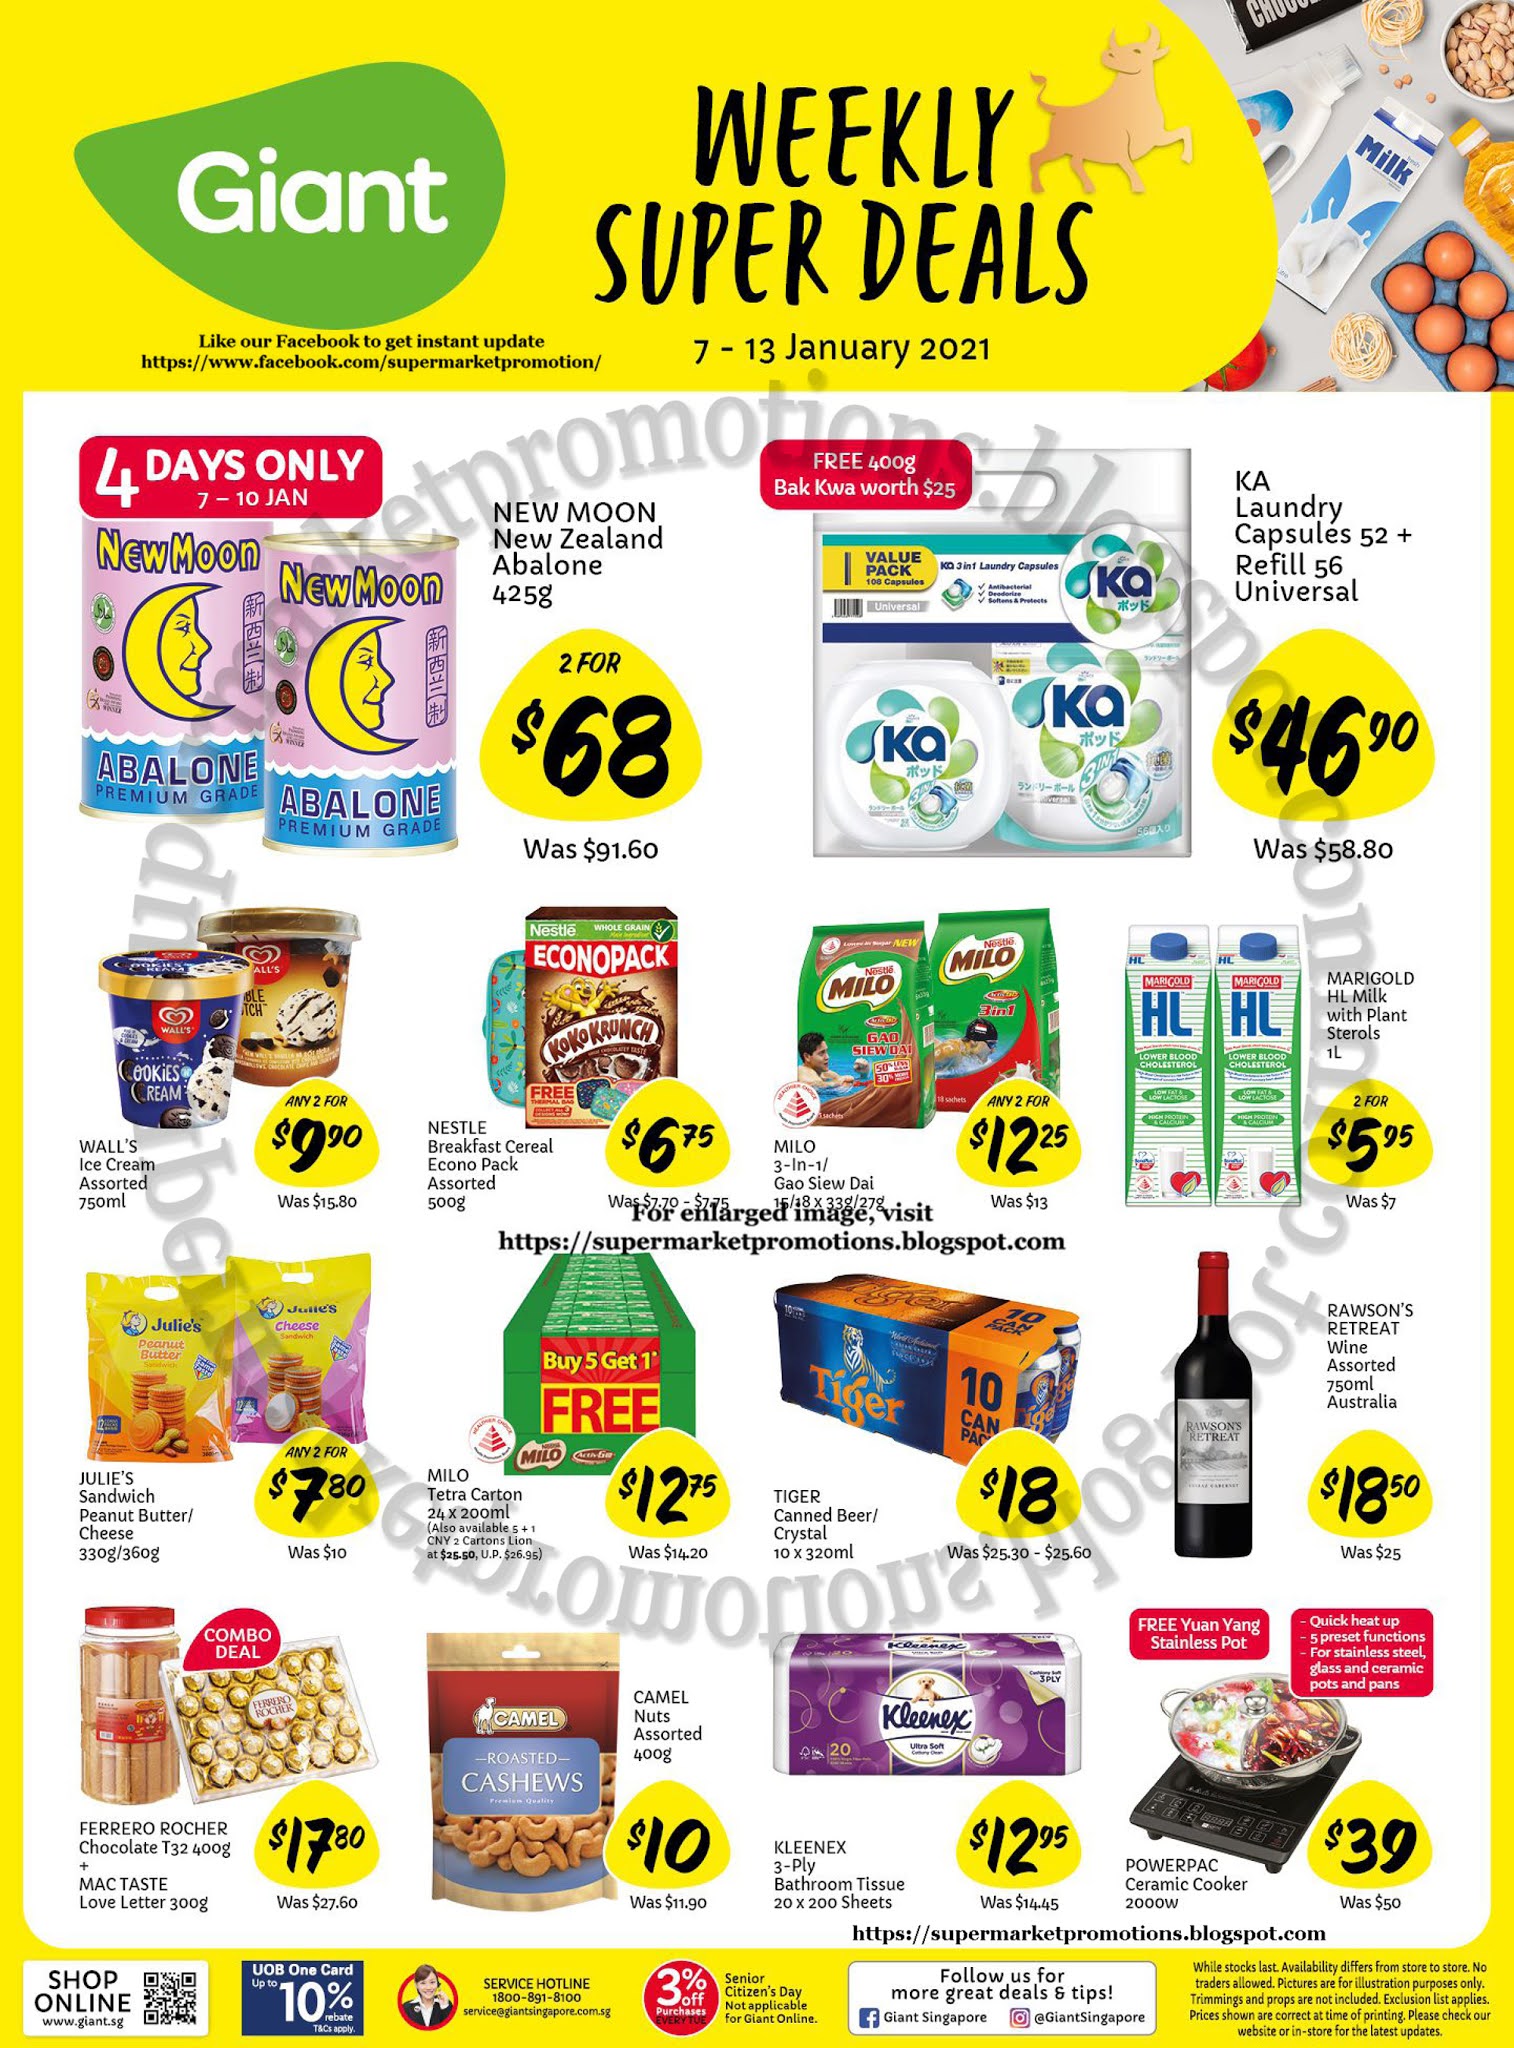  Giant  Weekly  Super Deals Promotion  07 13 January 2022 